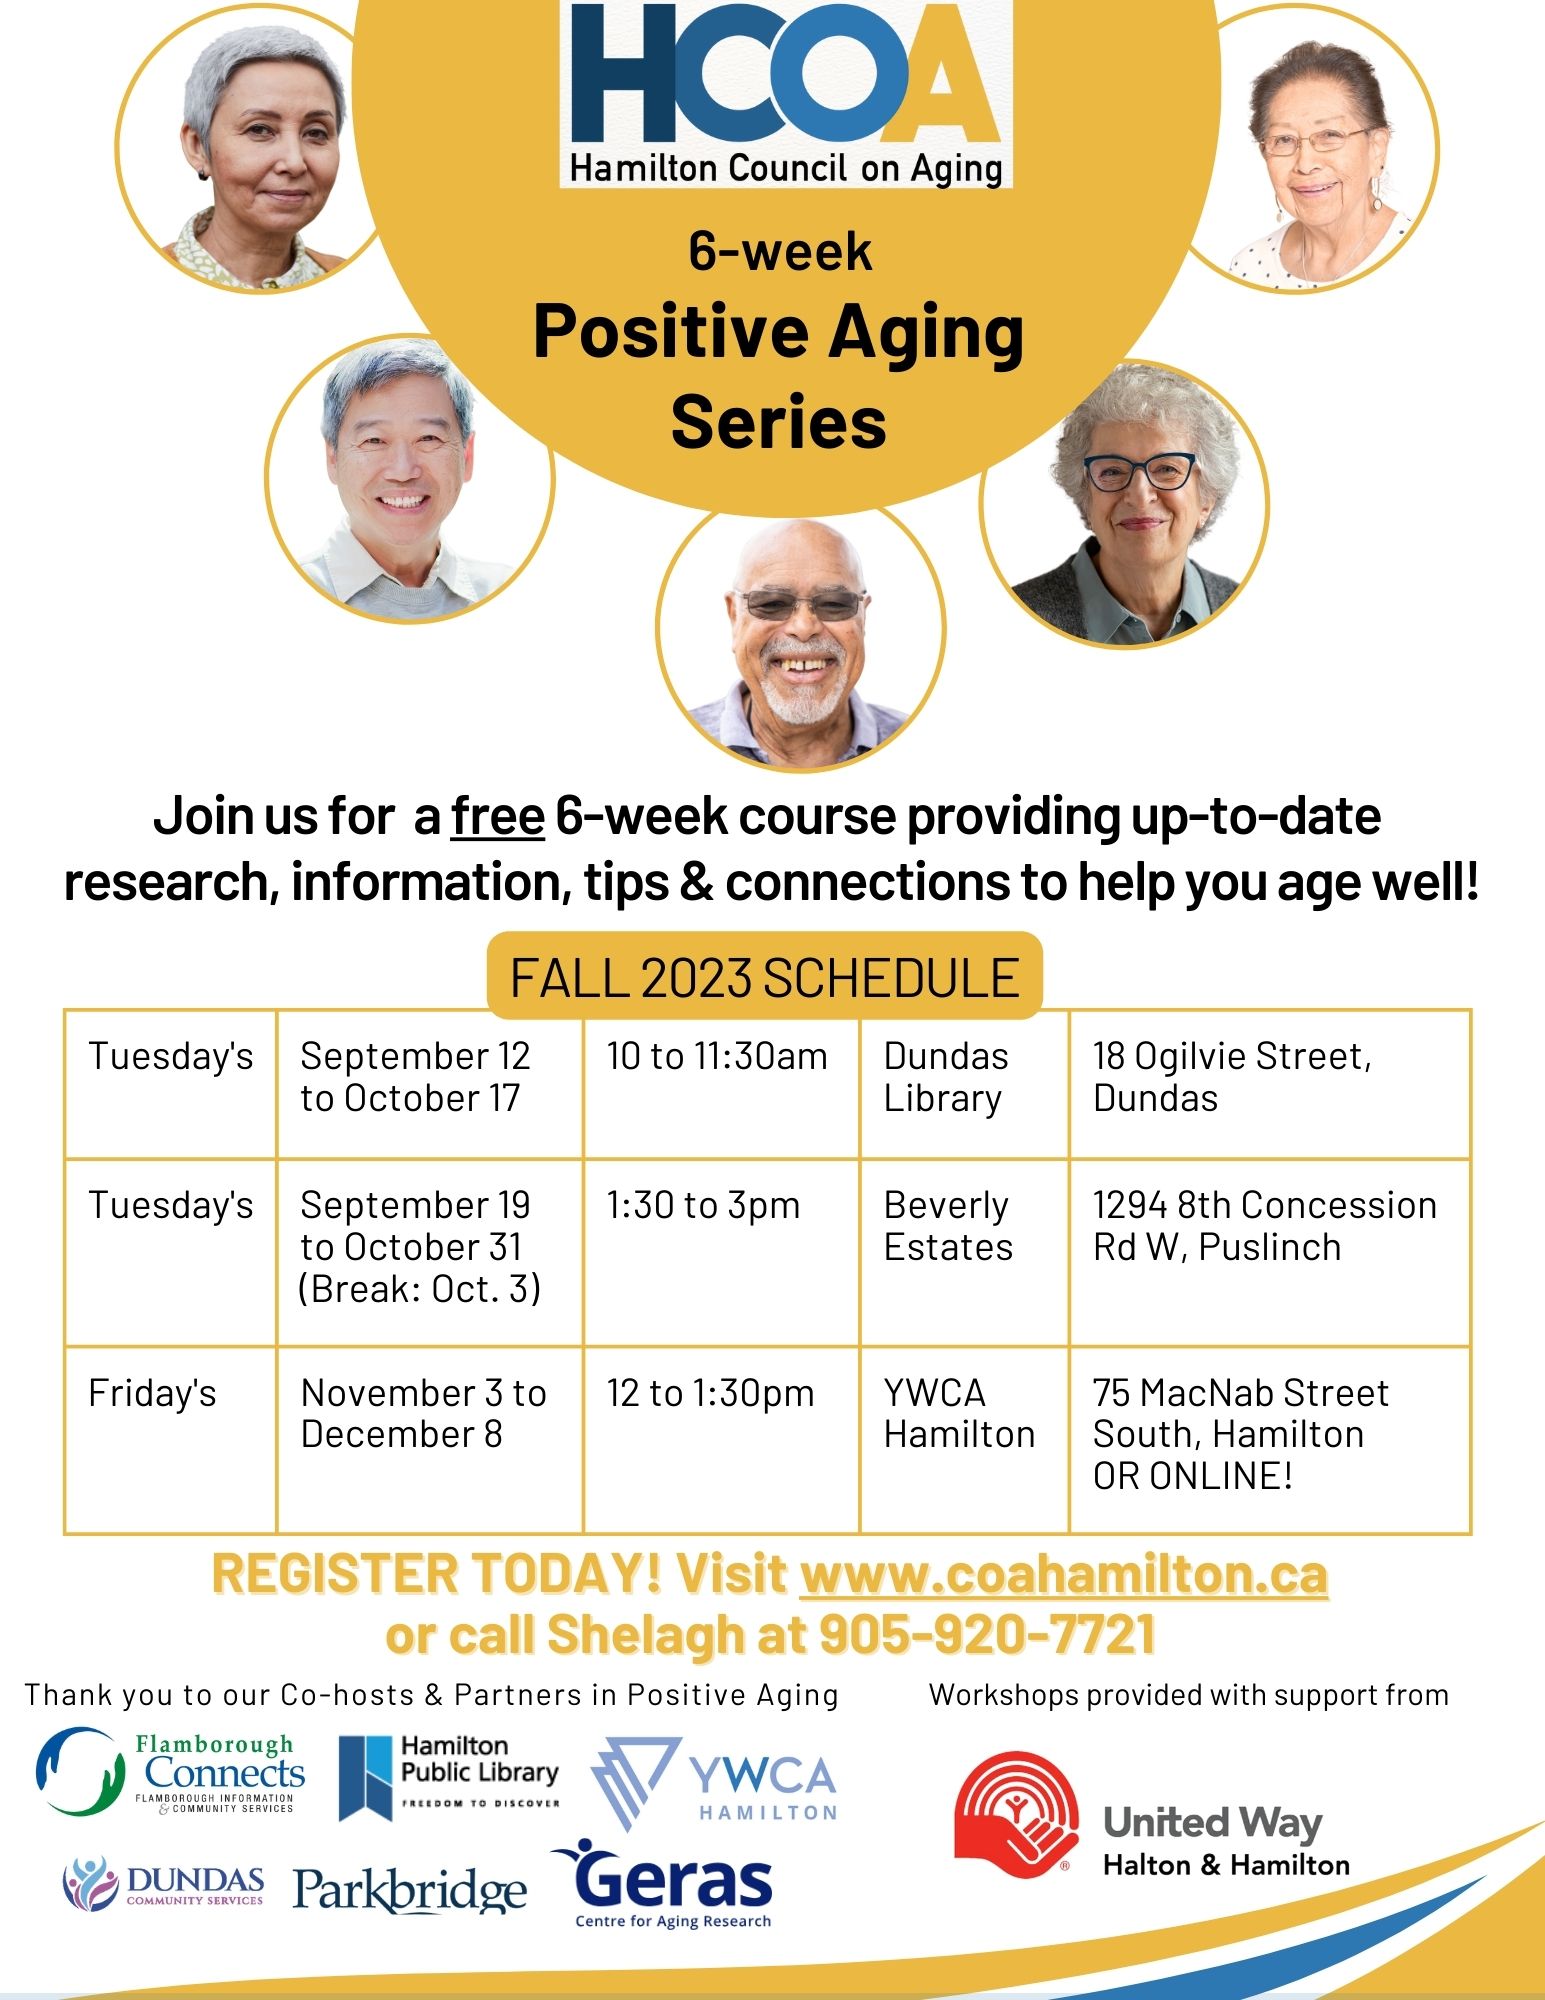 Fall Positive Aging Series Schedule